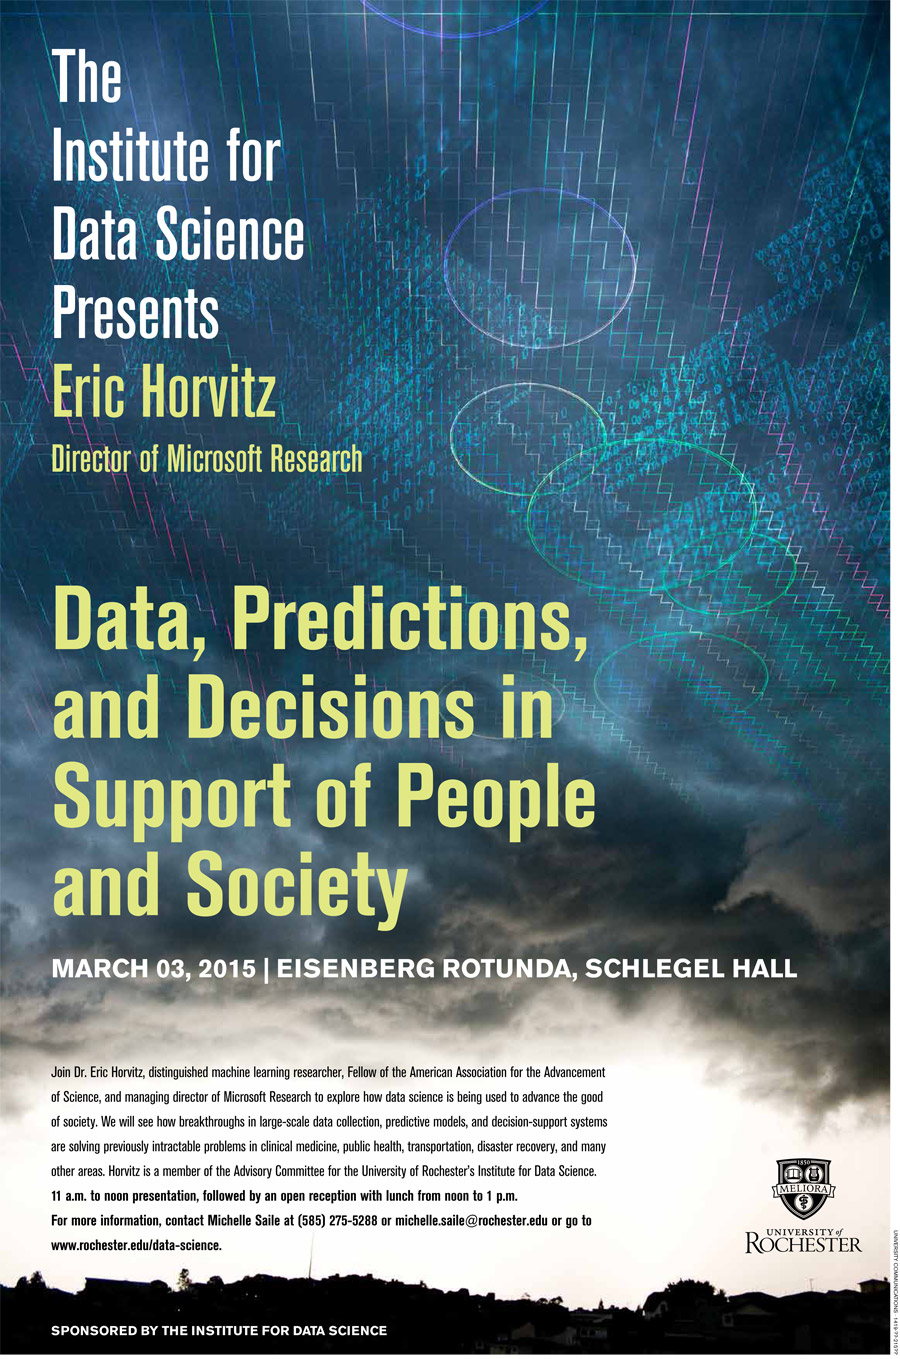 poster for upcoming talk with Eric Horvitz reads The Institute for Data Science presents Eric Horvitz, director of Microsoft Research. Data, Predictions, and Decisions in Support of People and Society. March 3, Eisenberg Rotunda, Schlegel Hall. 